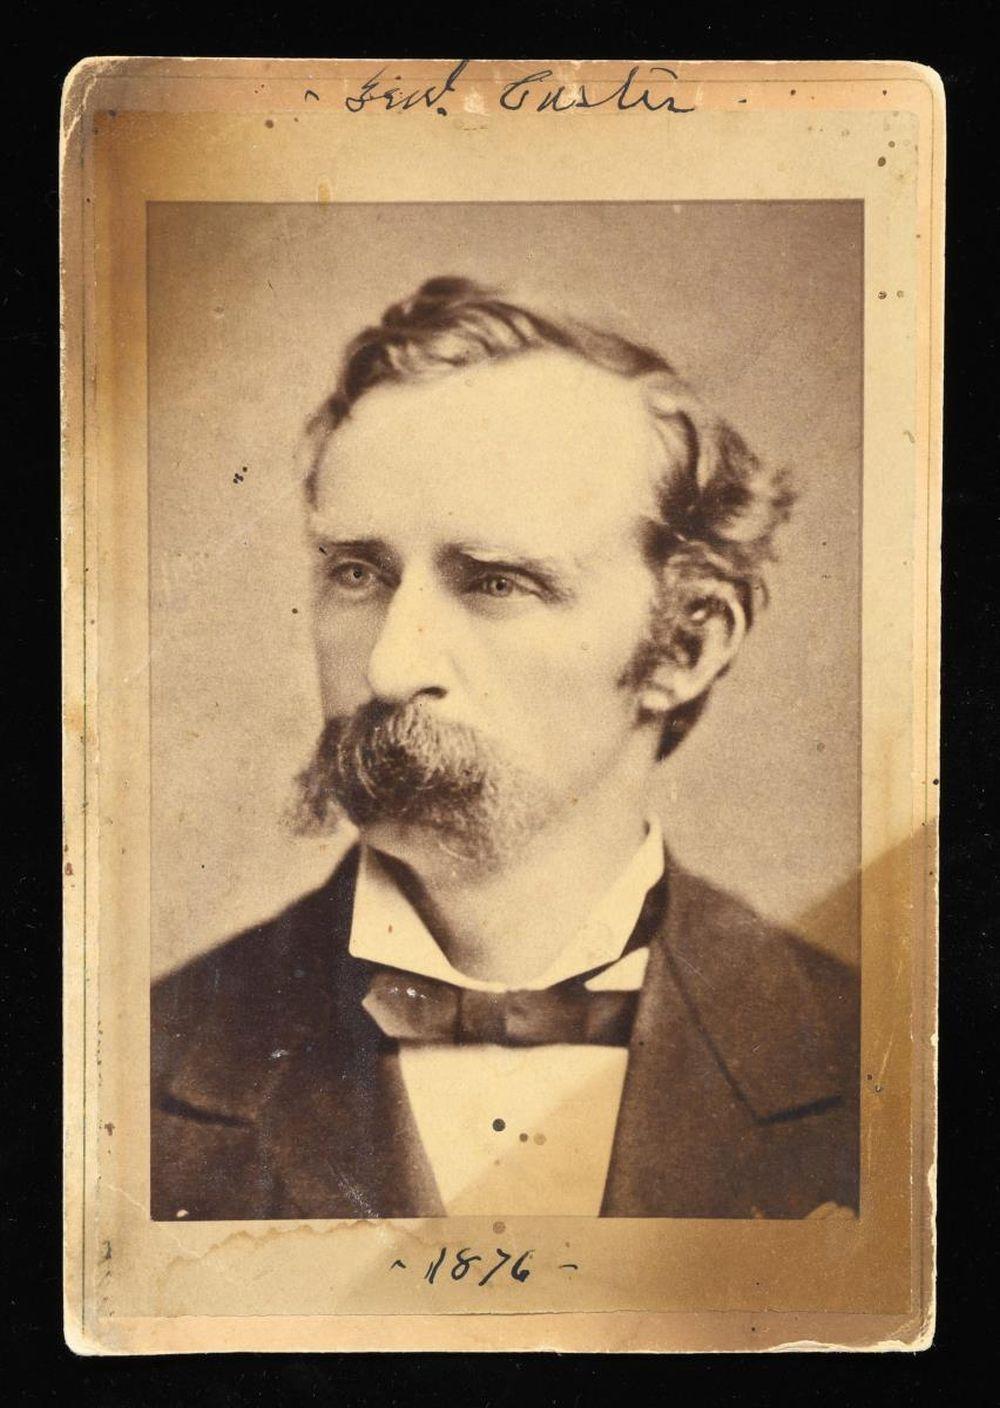 RARE GEORGE CUSTER 1876 DATED CABINET CARD.